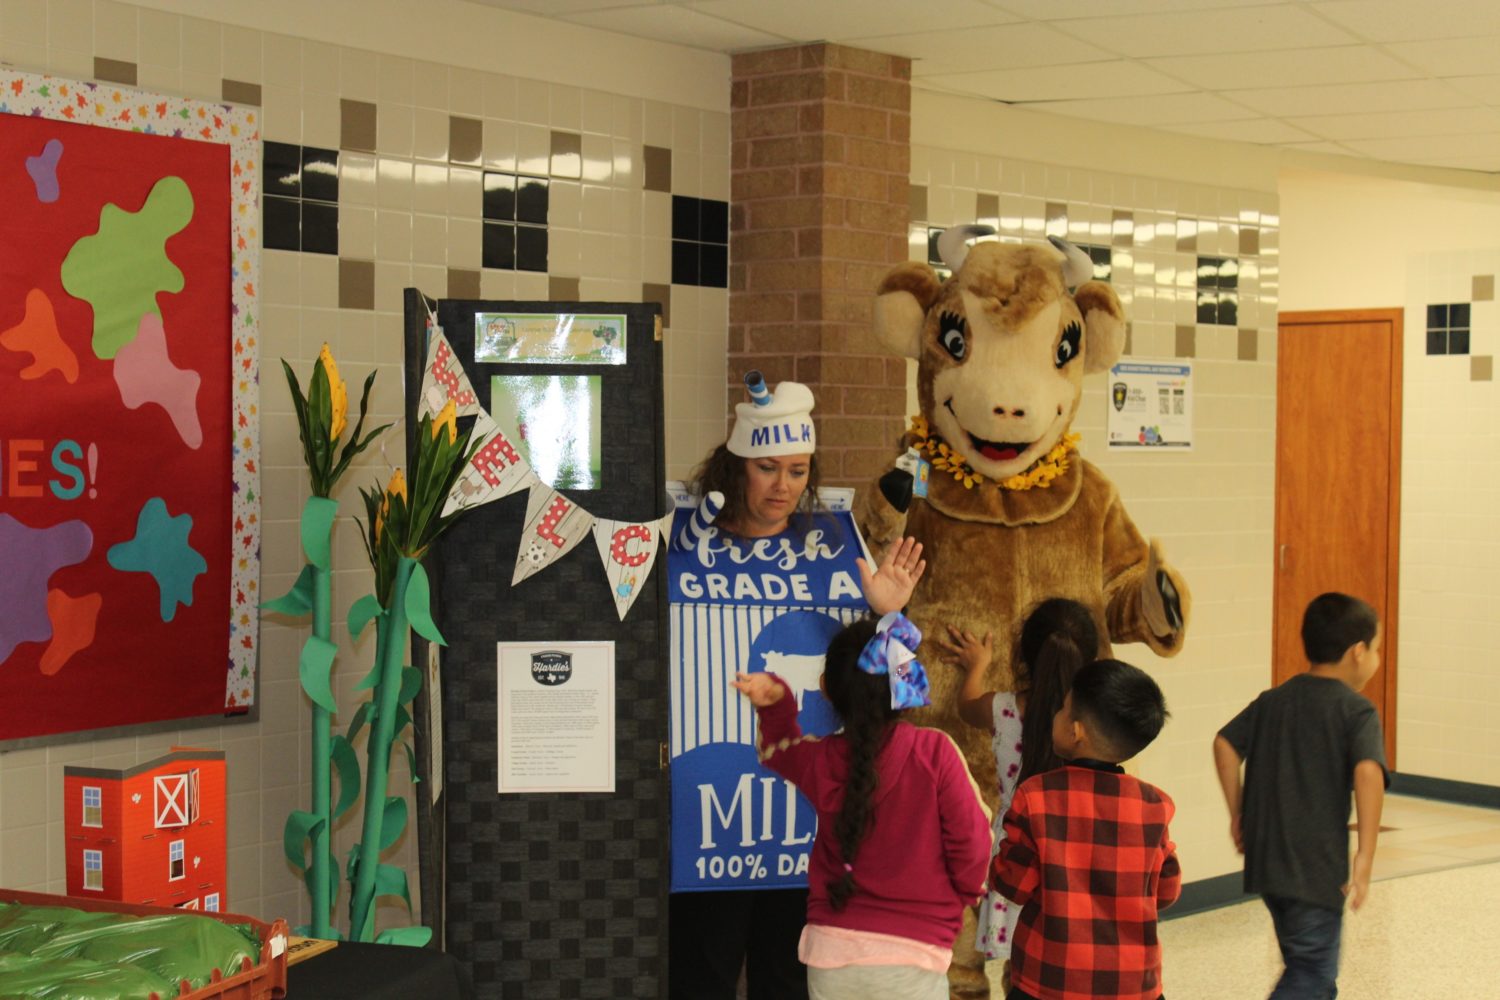 "students line up to see Elsie the Cow"